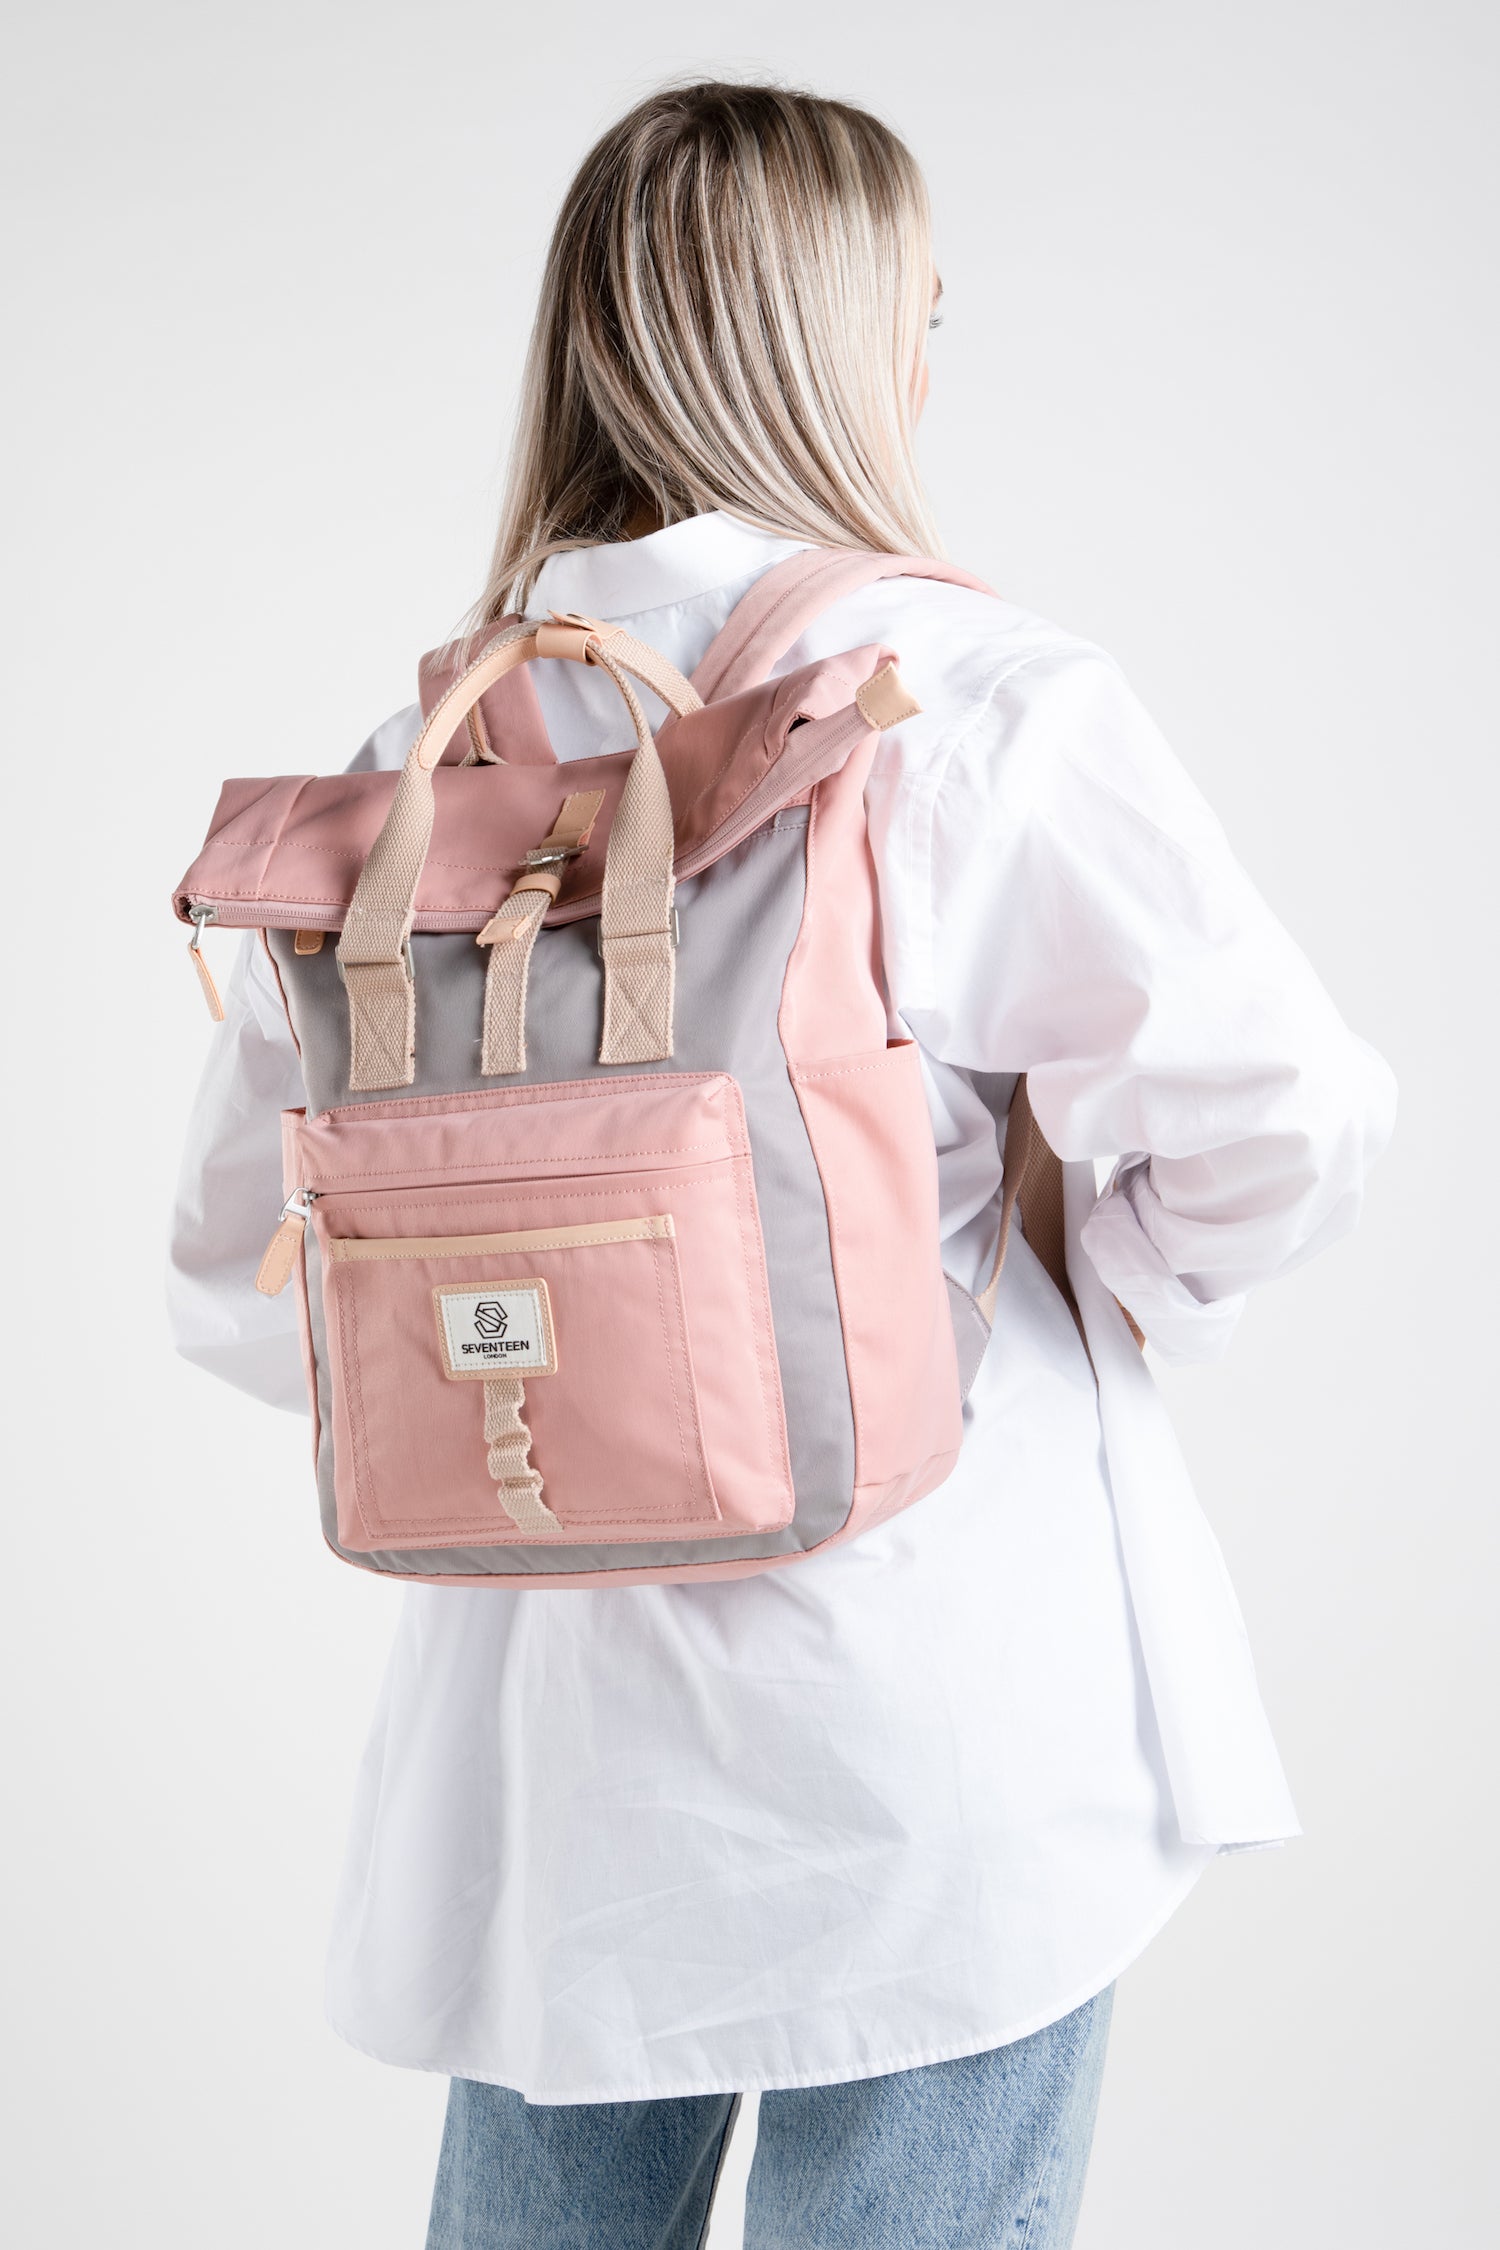 Canary Wharf Backpack - Pink with Grey